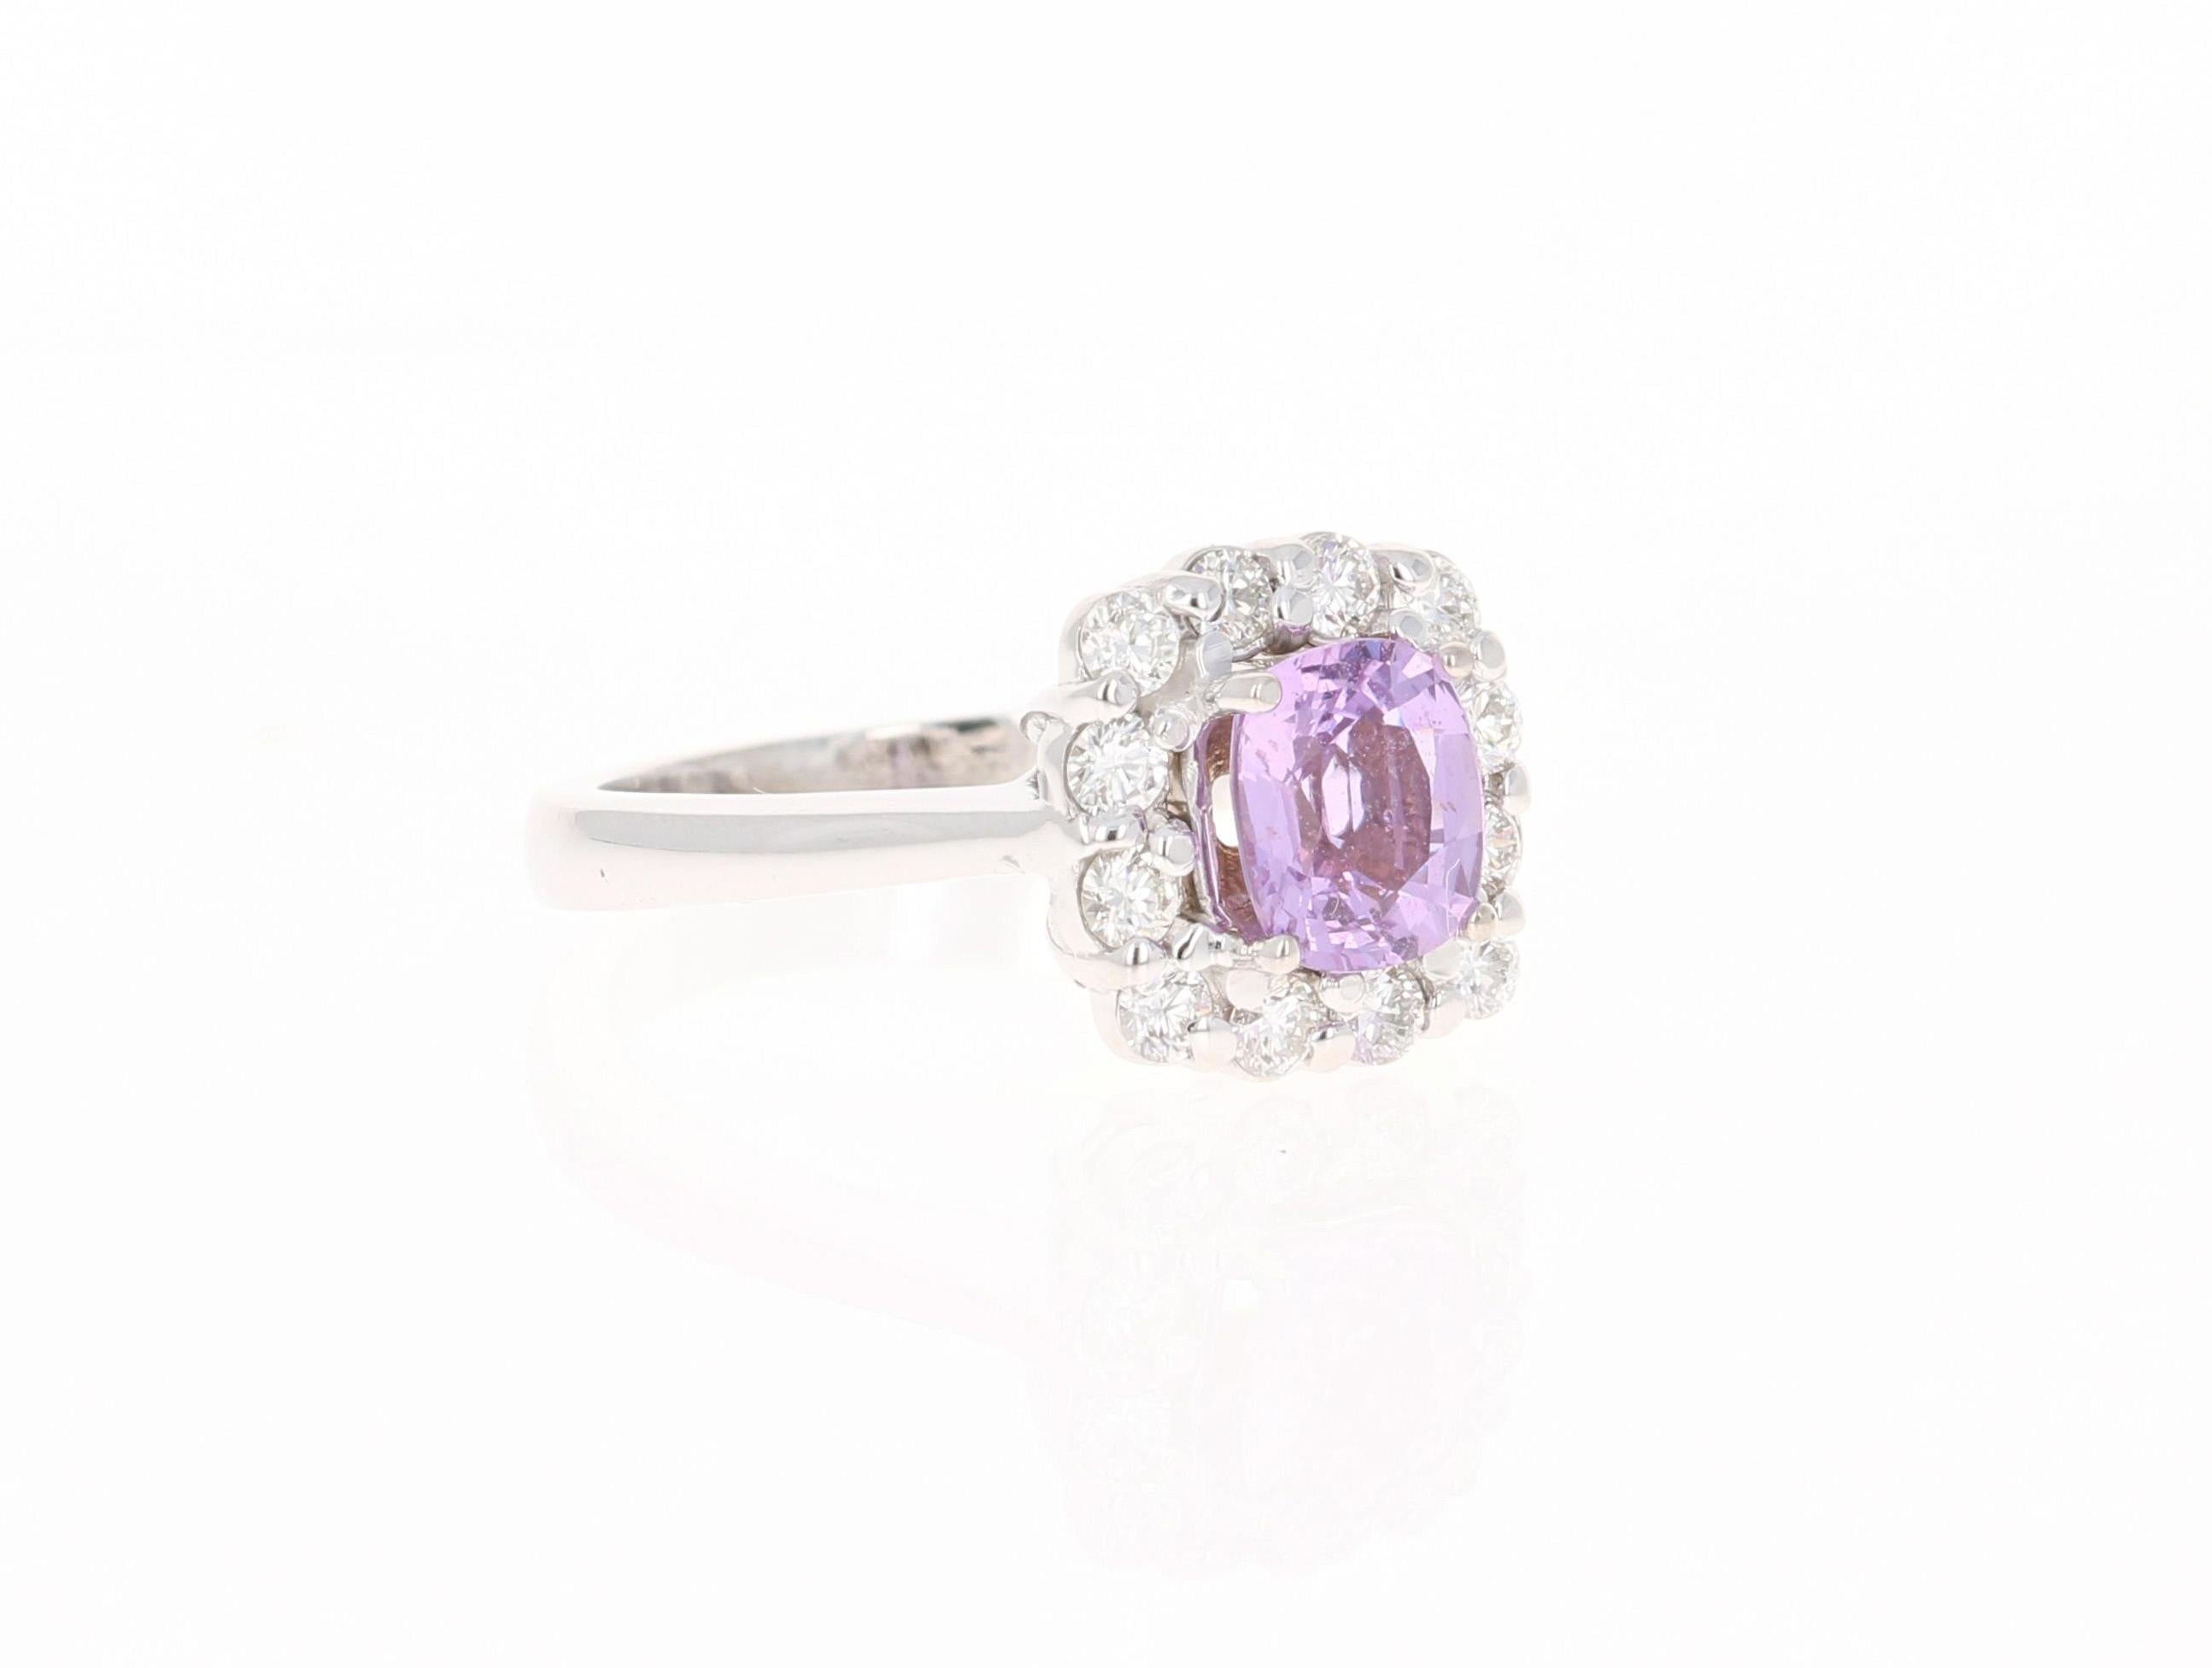 This ring has a Cushion Cut Pink Sapphire that weighs 1.49 carats. It also has 12 Round Cut Diamonds that surround the ring that weighs 0.54 carats. (Clarity: VS, Color: F) The GIA Certificate # is: 6224046214. You can see a copy of the certificate